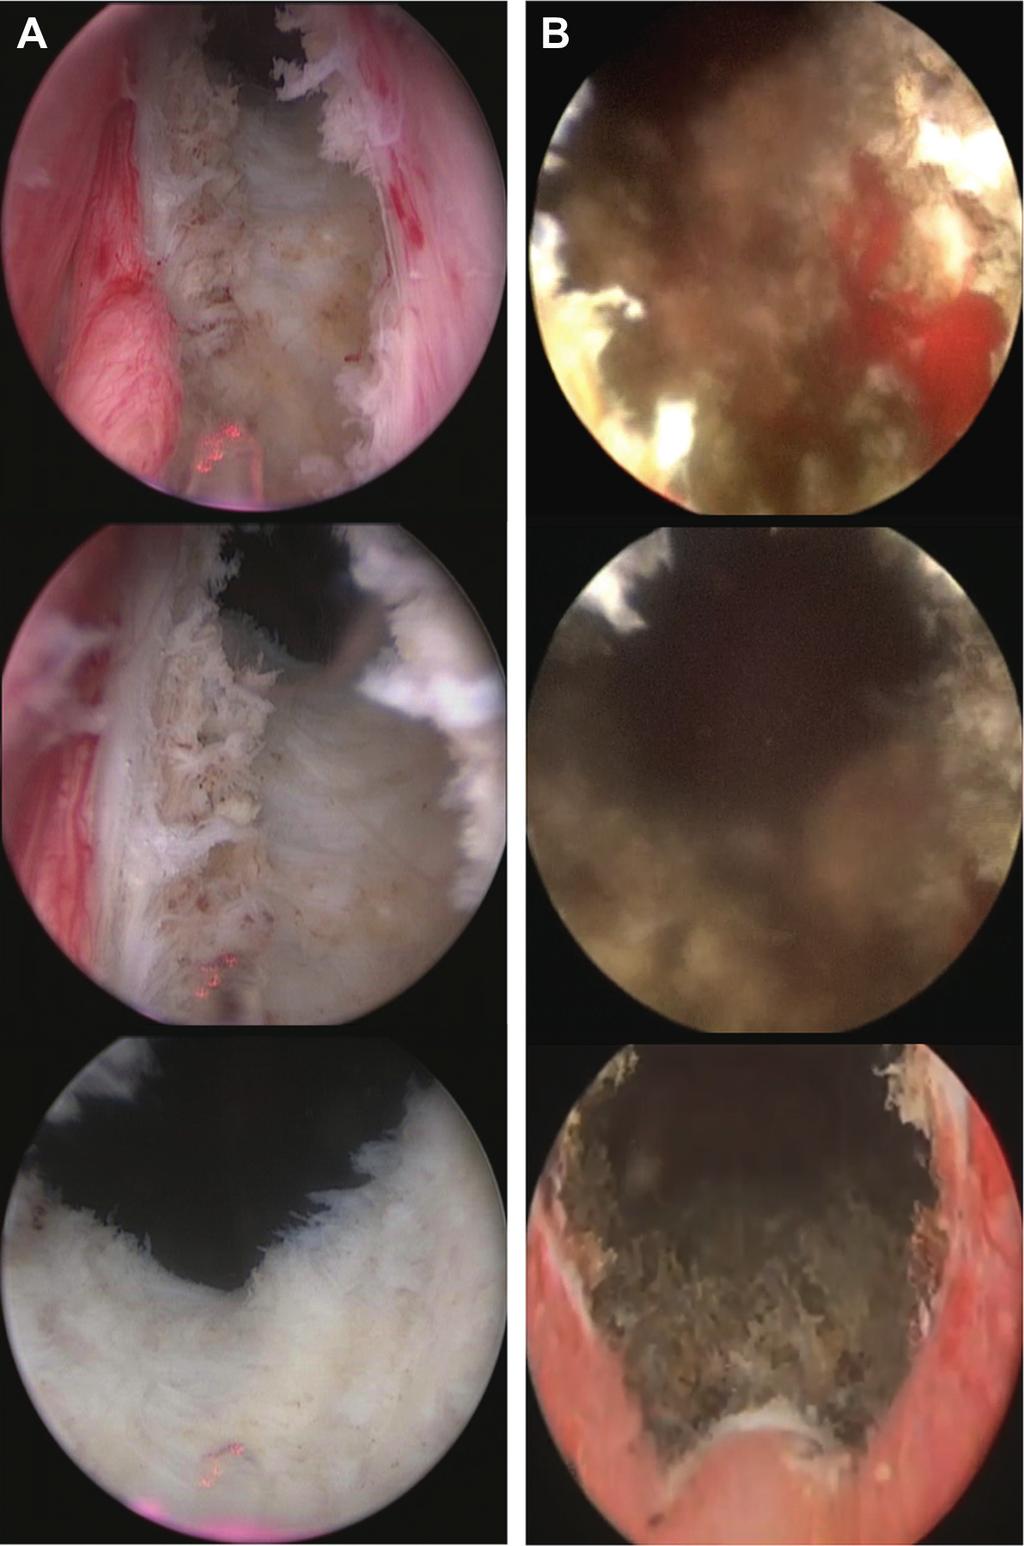 150 COMPARISON OF LASER TECHNIQUES FOR BENIGN PROSTATIC HYPERPLASIA Figure 1. Hol-TUIP (A) and PVP with GreenLight HPSÒ (B) Tertiary.